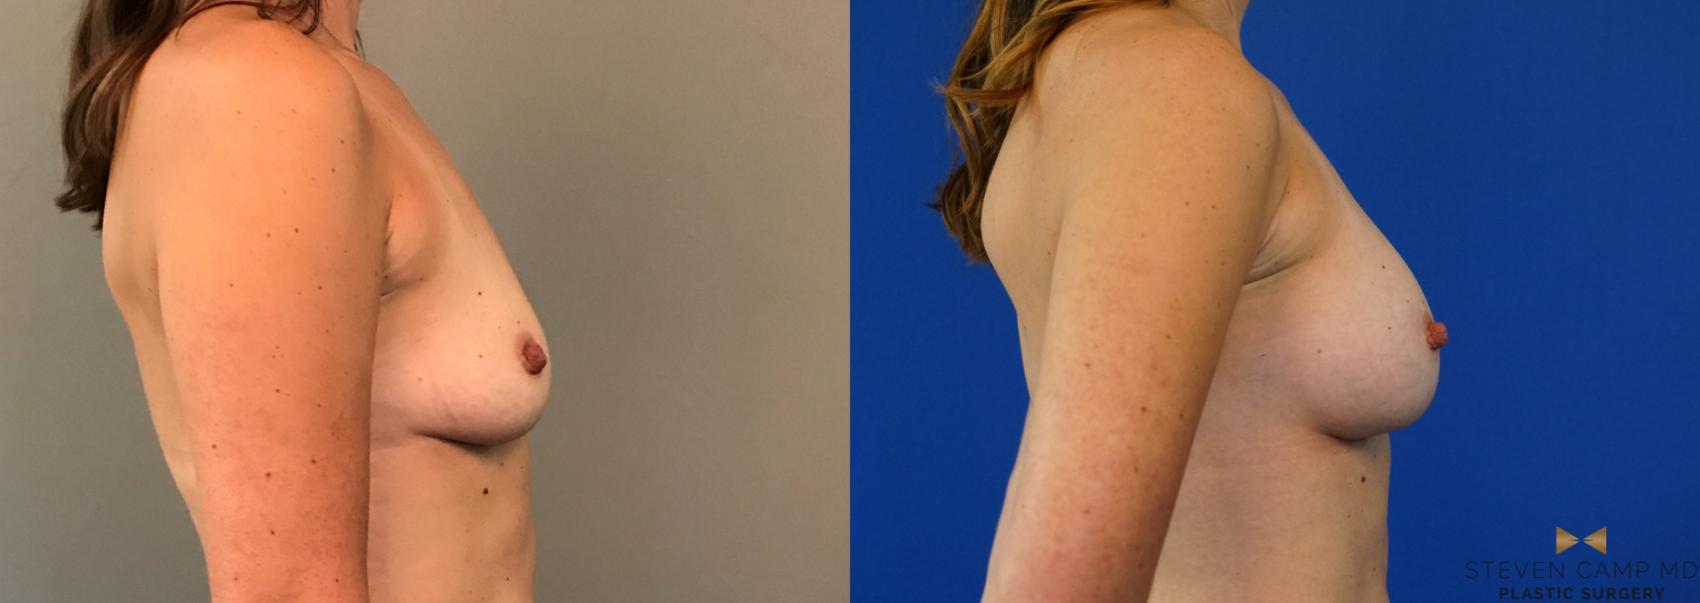 Breast Augmentation Before & After Photo | Fort Worth, Texas | Steven Camp MD Plastic Surgery